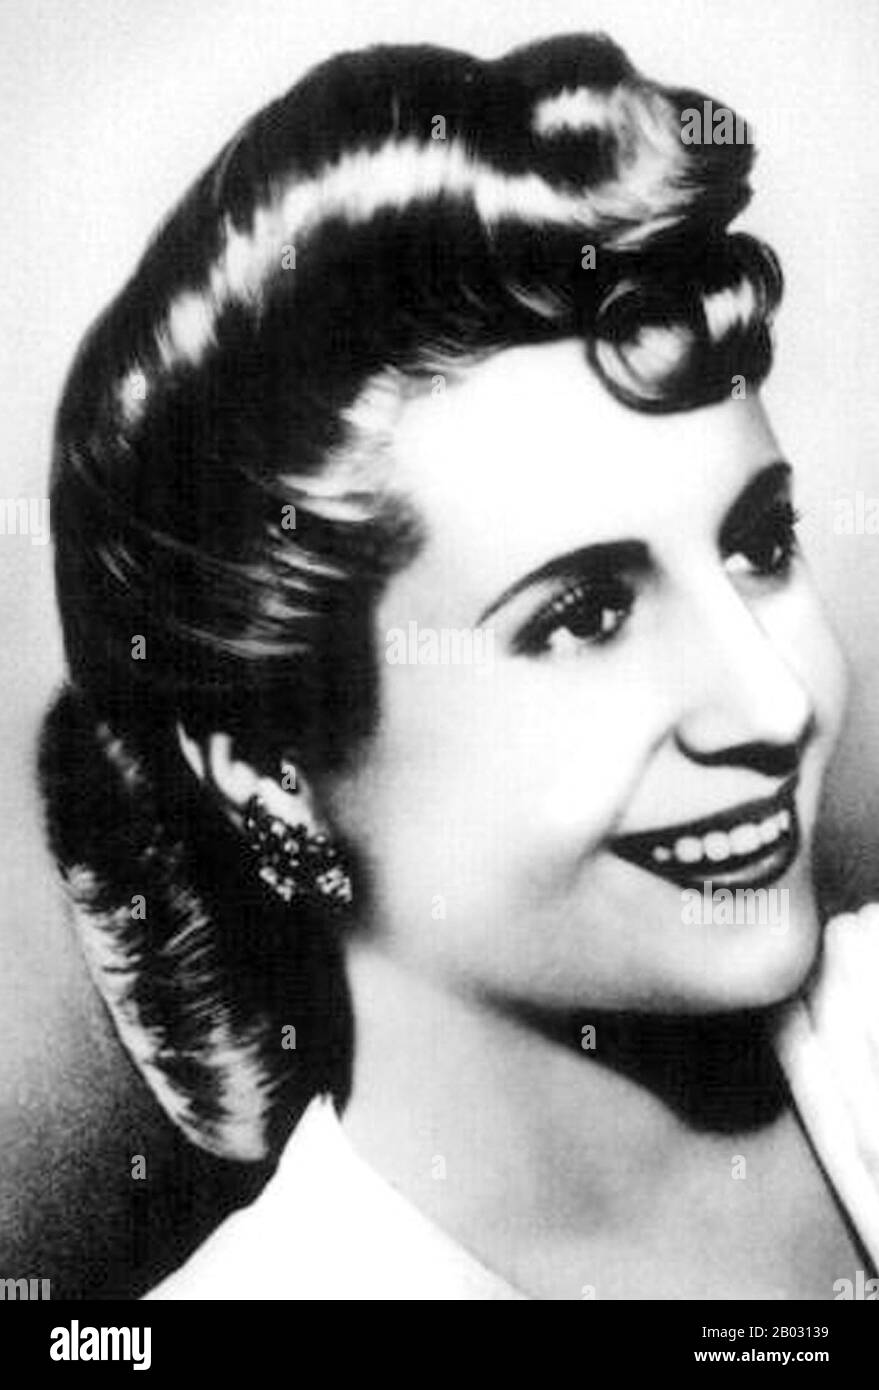 Maria Eva Duarte de Peron (7 May 1919 – 26 July 1952) was the second wife of Argentine President Juan Peron (1895–1974) and served as the First Lady of Argentina from 1946 until her death in 1952.  She is usually referred to as Eva Peron, or by the affectionate Spanish language diminutive Evita. Stock Photo